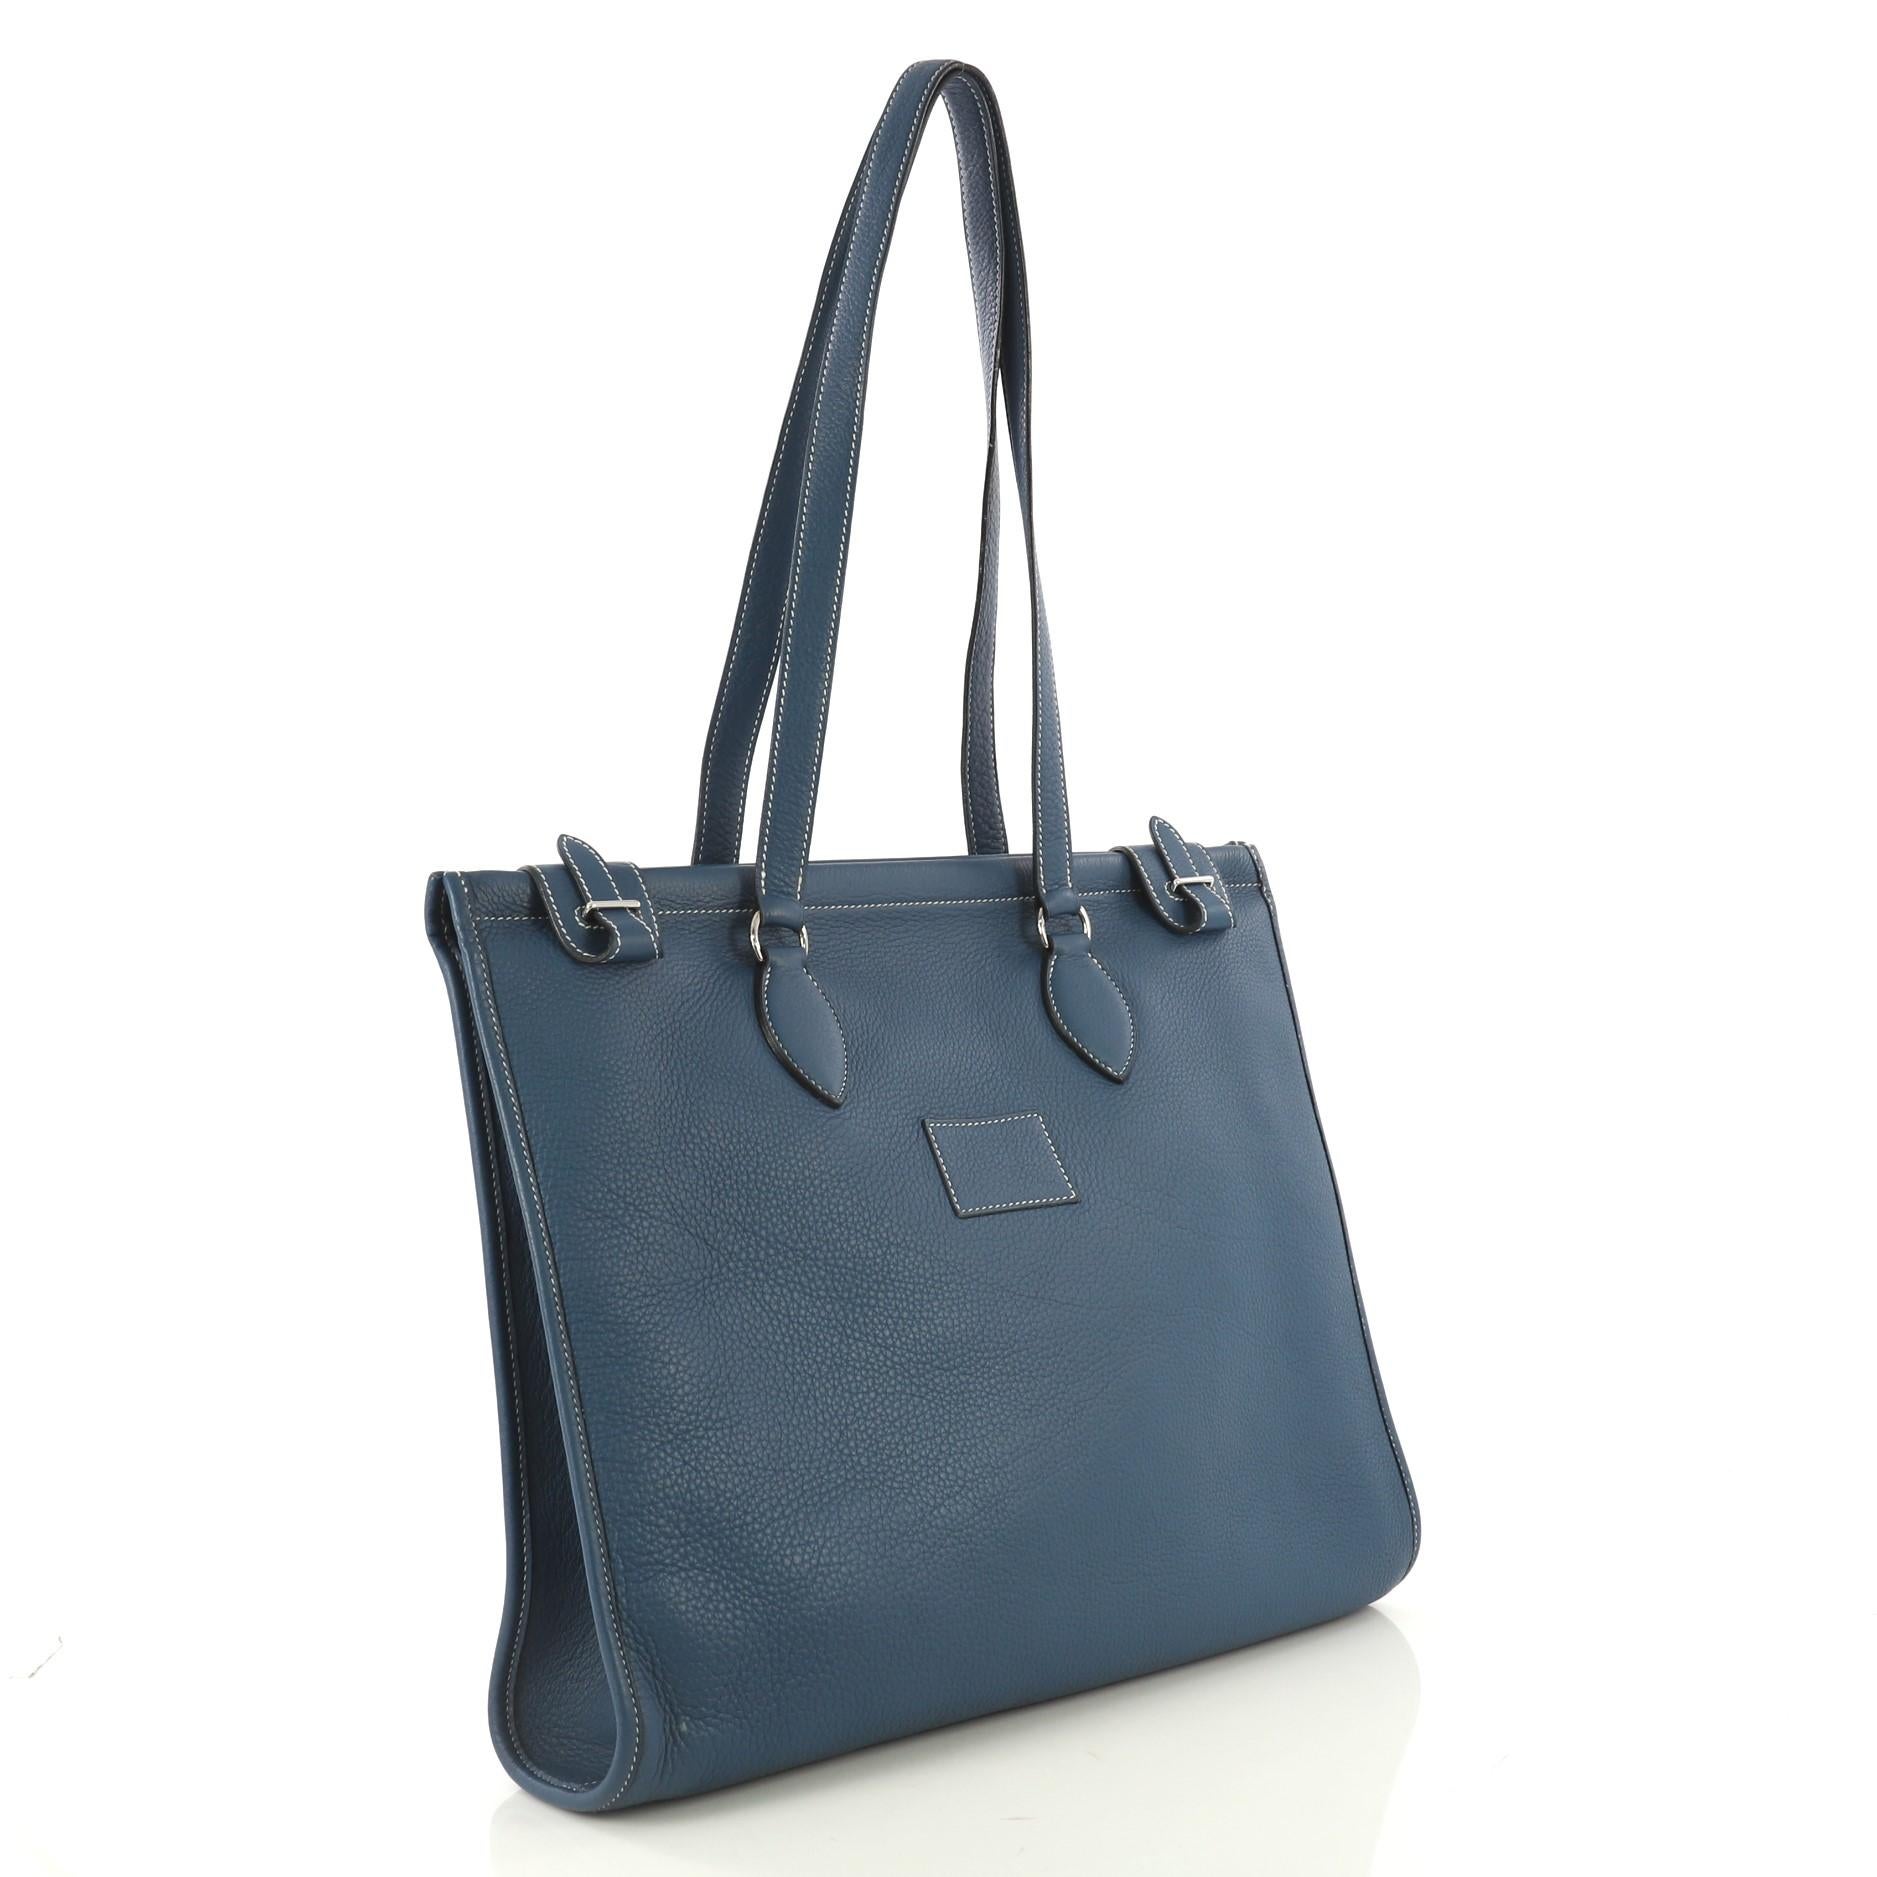 This Hermes Kaba Tote Leather 40, crafted from Bleu Thalassa blue clemence leather, features dual flat leather handles and palladium hardware. Its top buckle closure opens to a Bleu Thalassa blue raw leather interior. Date stamp reads: G Square